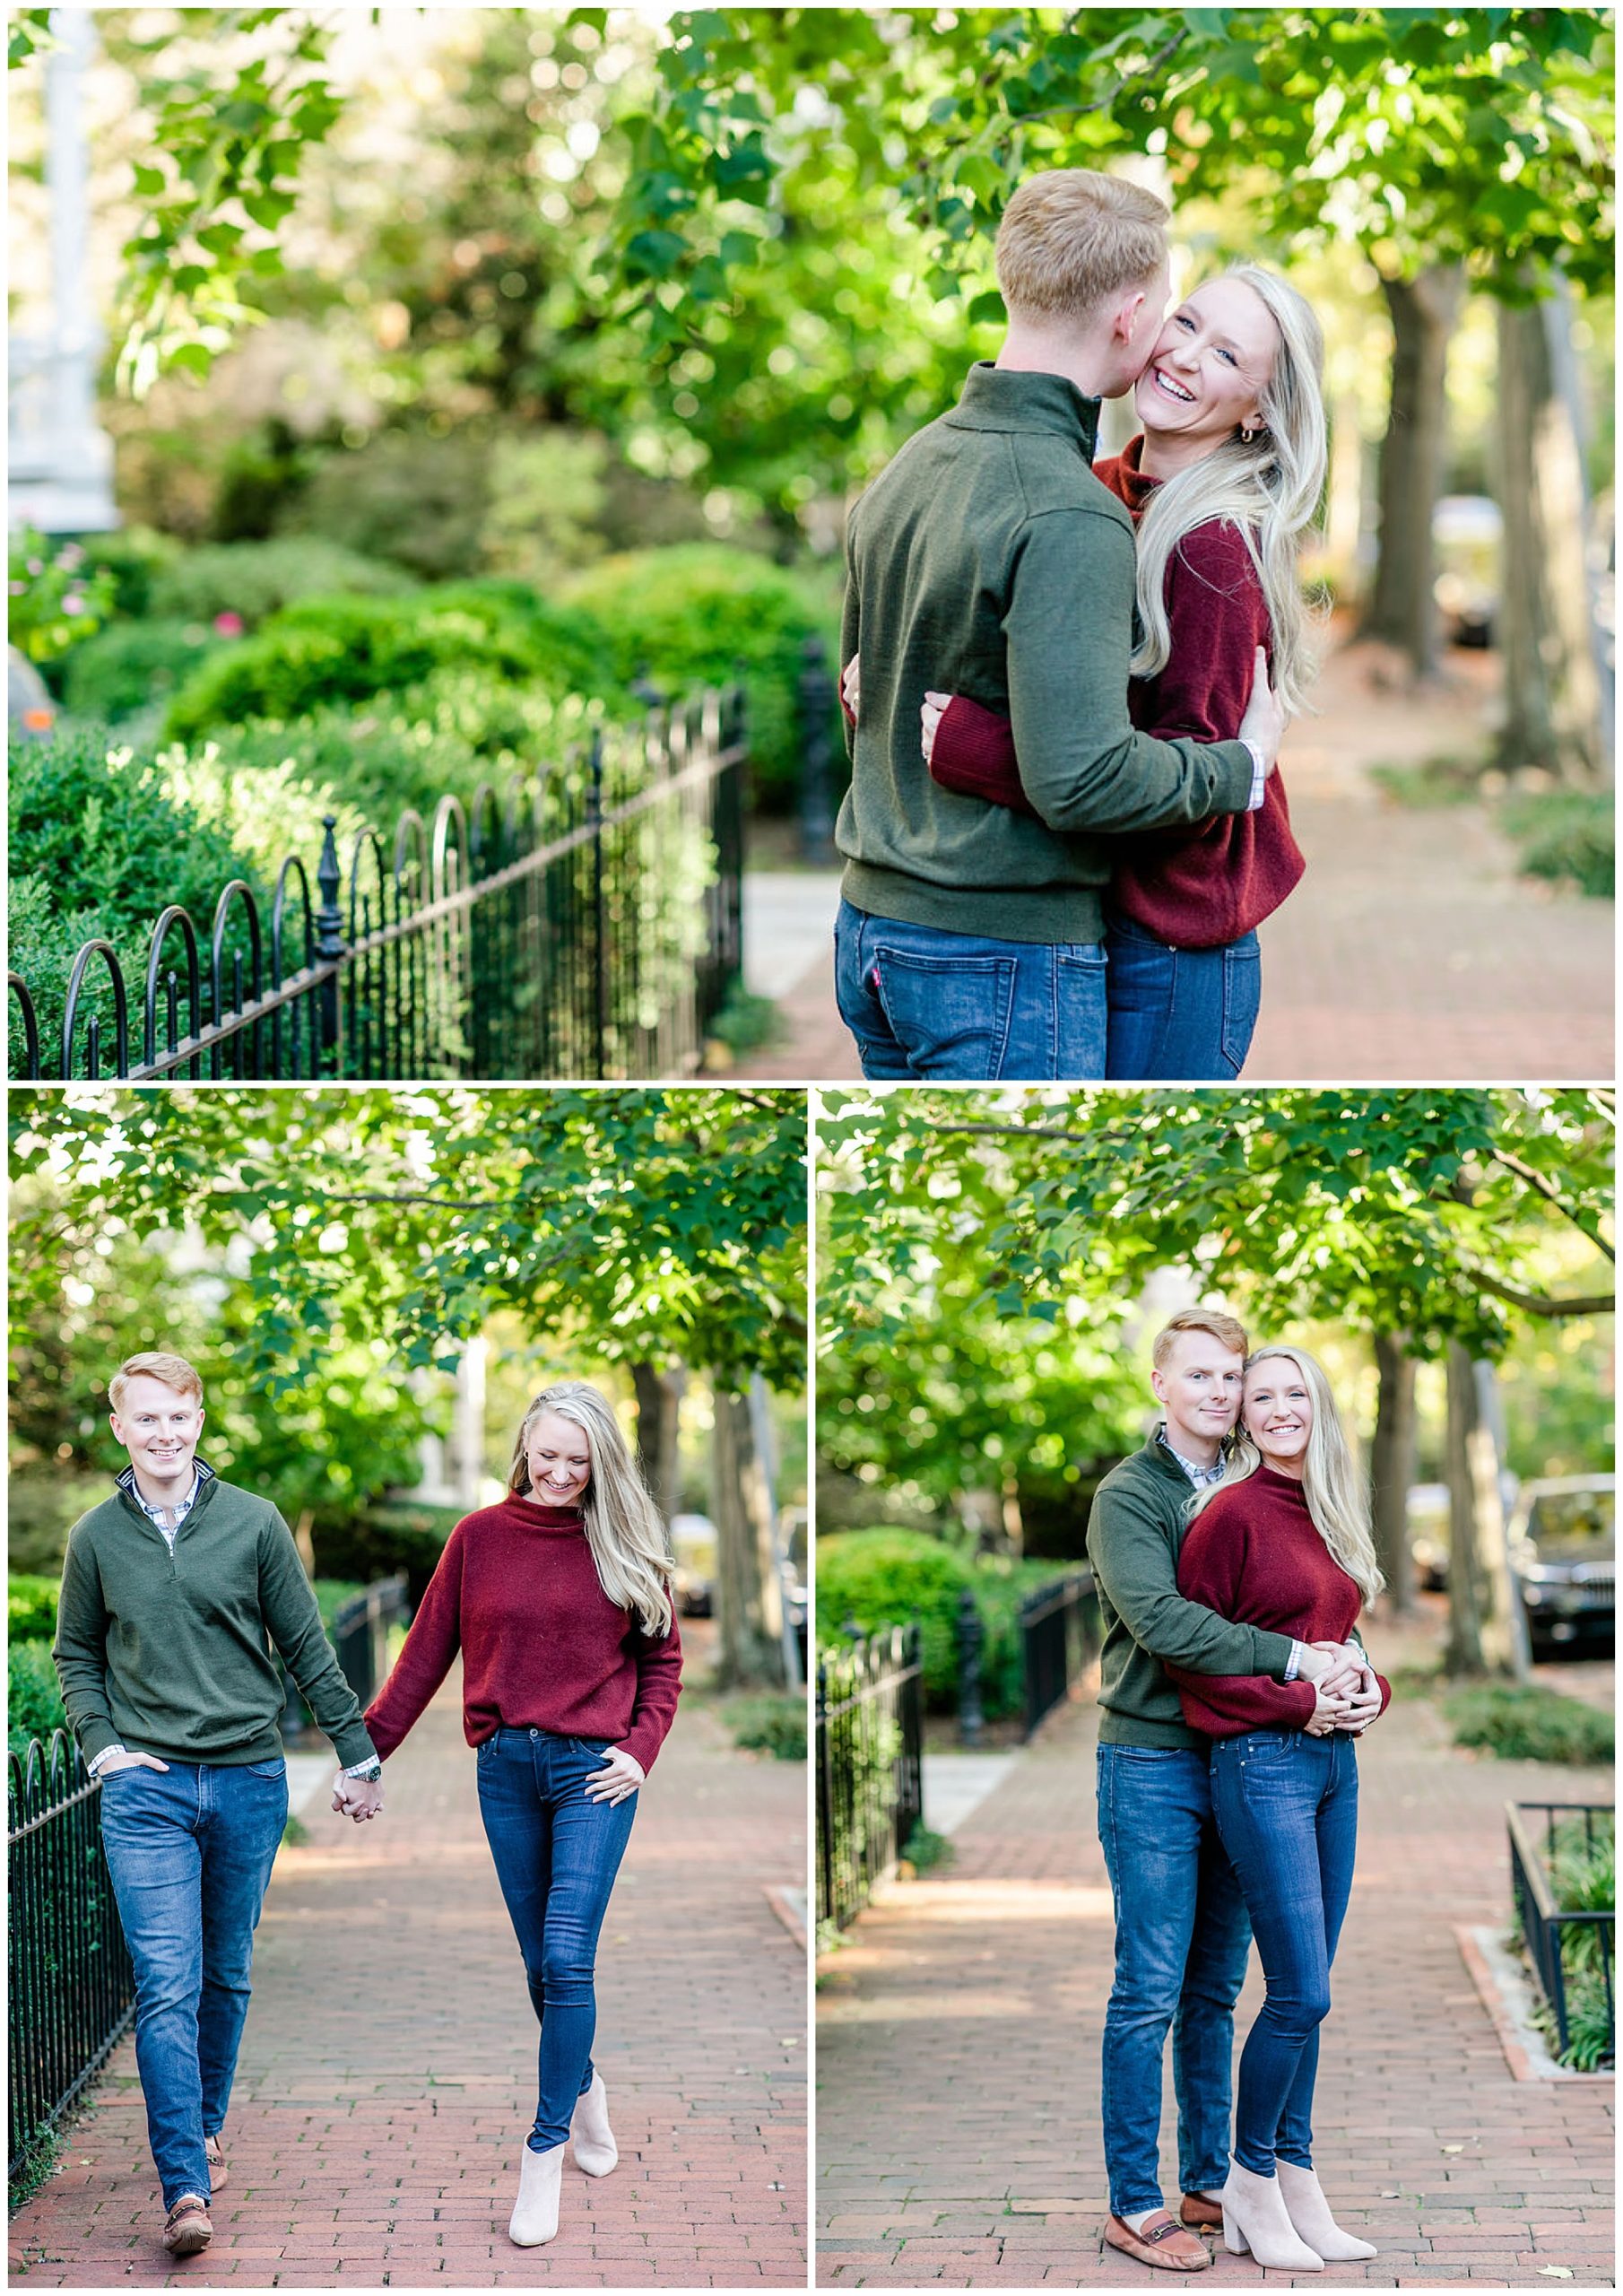 autumn magic hour engagement session, Washington D.C. engagement photos, Georgetown engagement photos, autumn engagement photos, DC portraits, DC engagement portraits, save the dates photos, Rachel E.H. Photography, couple hugging, couple holding hands, man hugging woman from behind